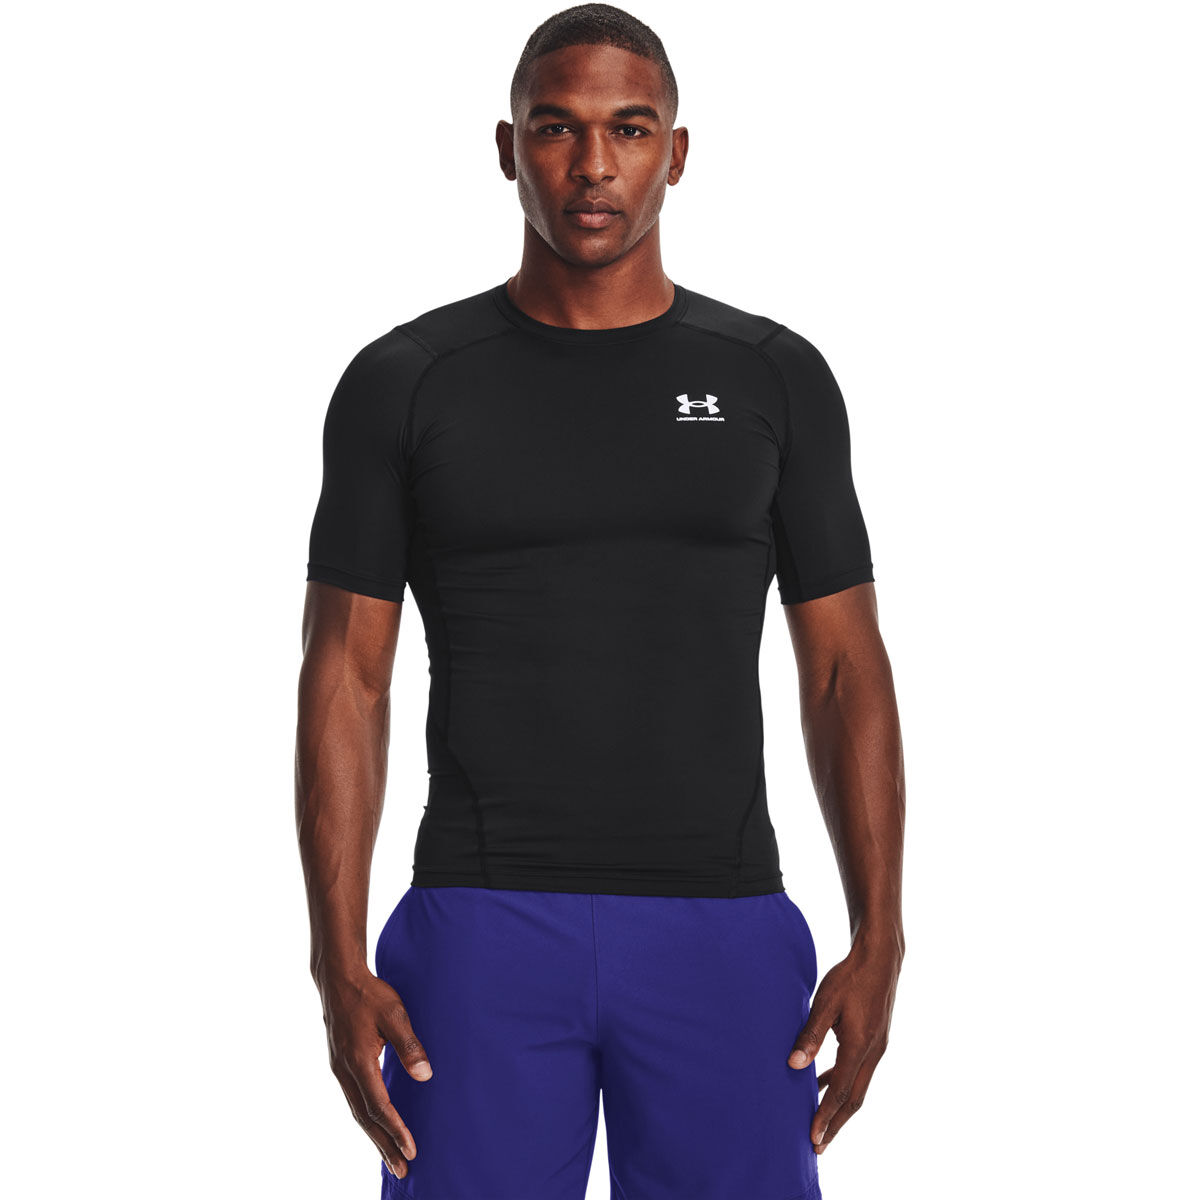 Men's Compression Clothing, Tights, Shorts & Tops